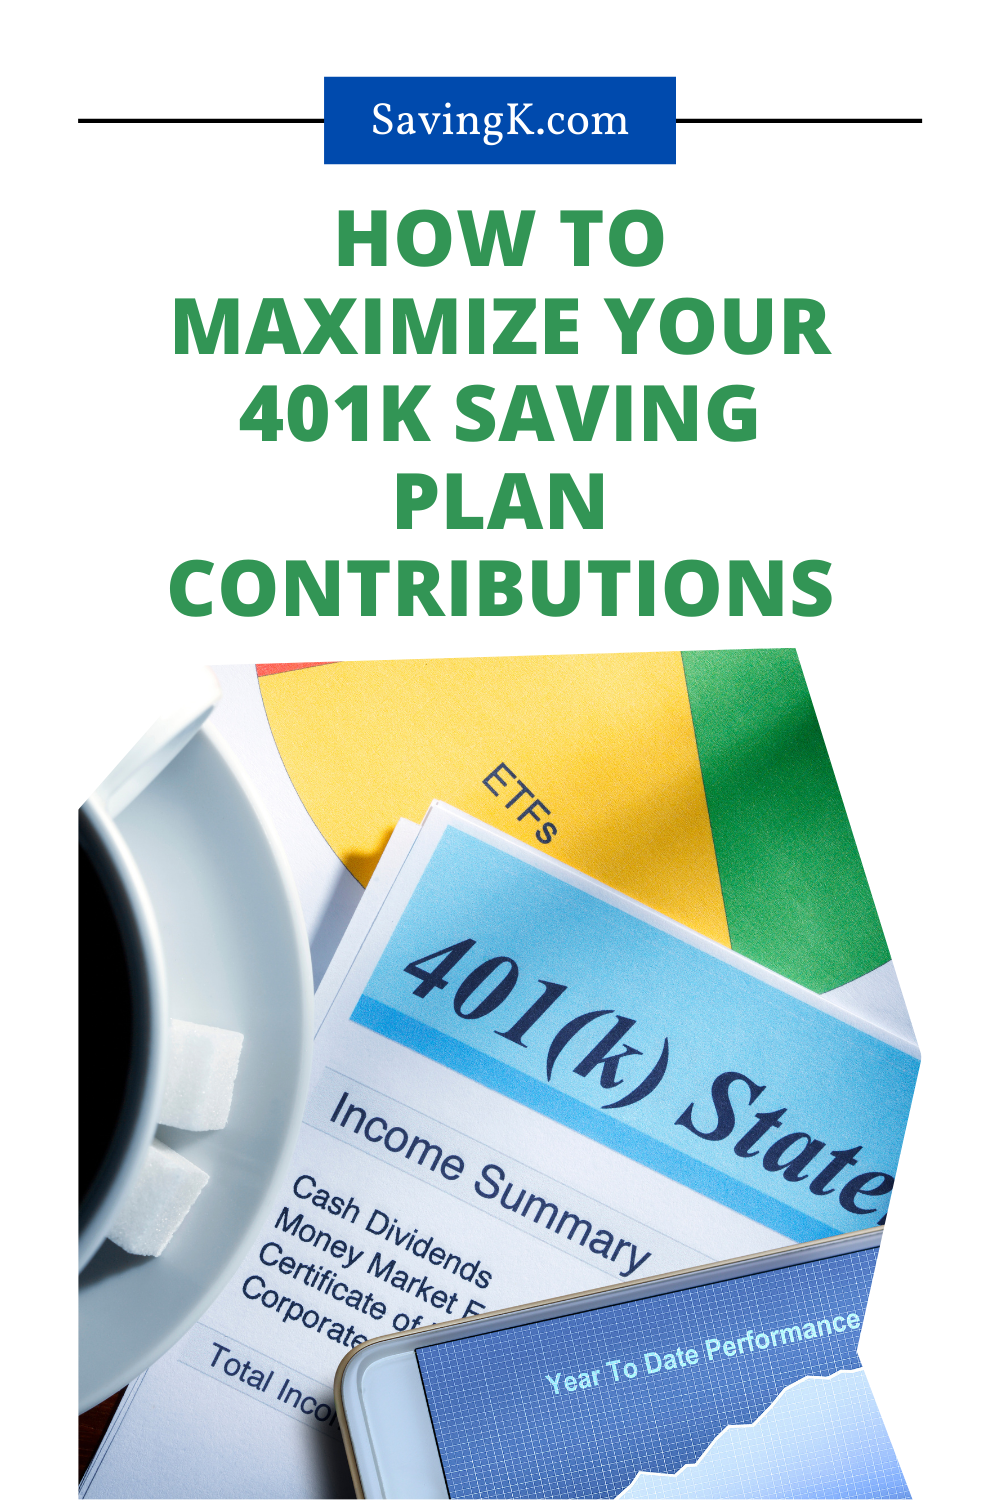 How to Maximize Your 401K Saving Plan Contributions